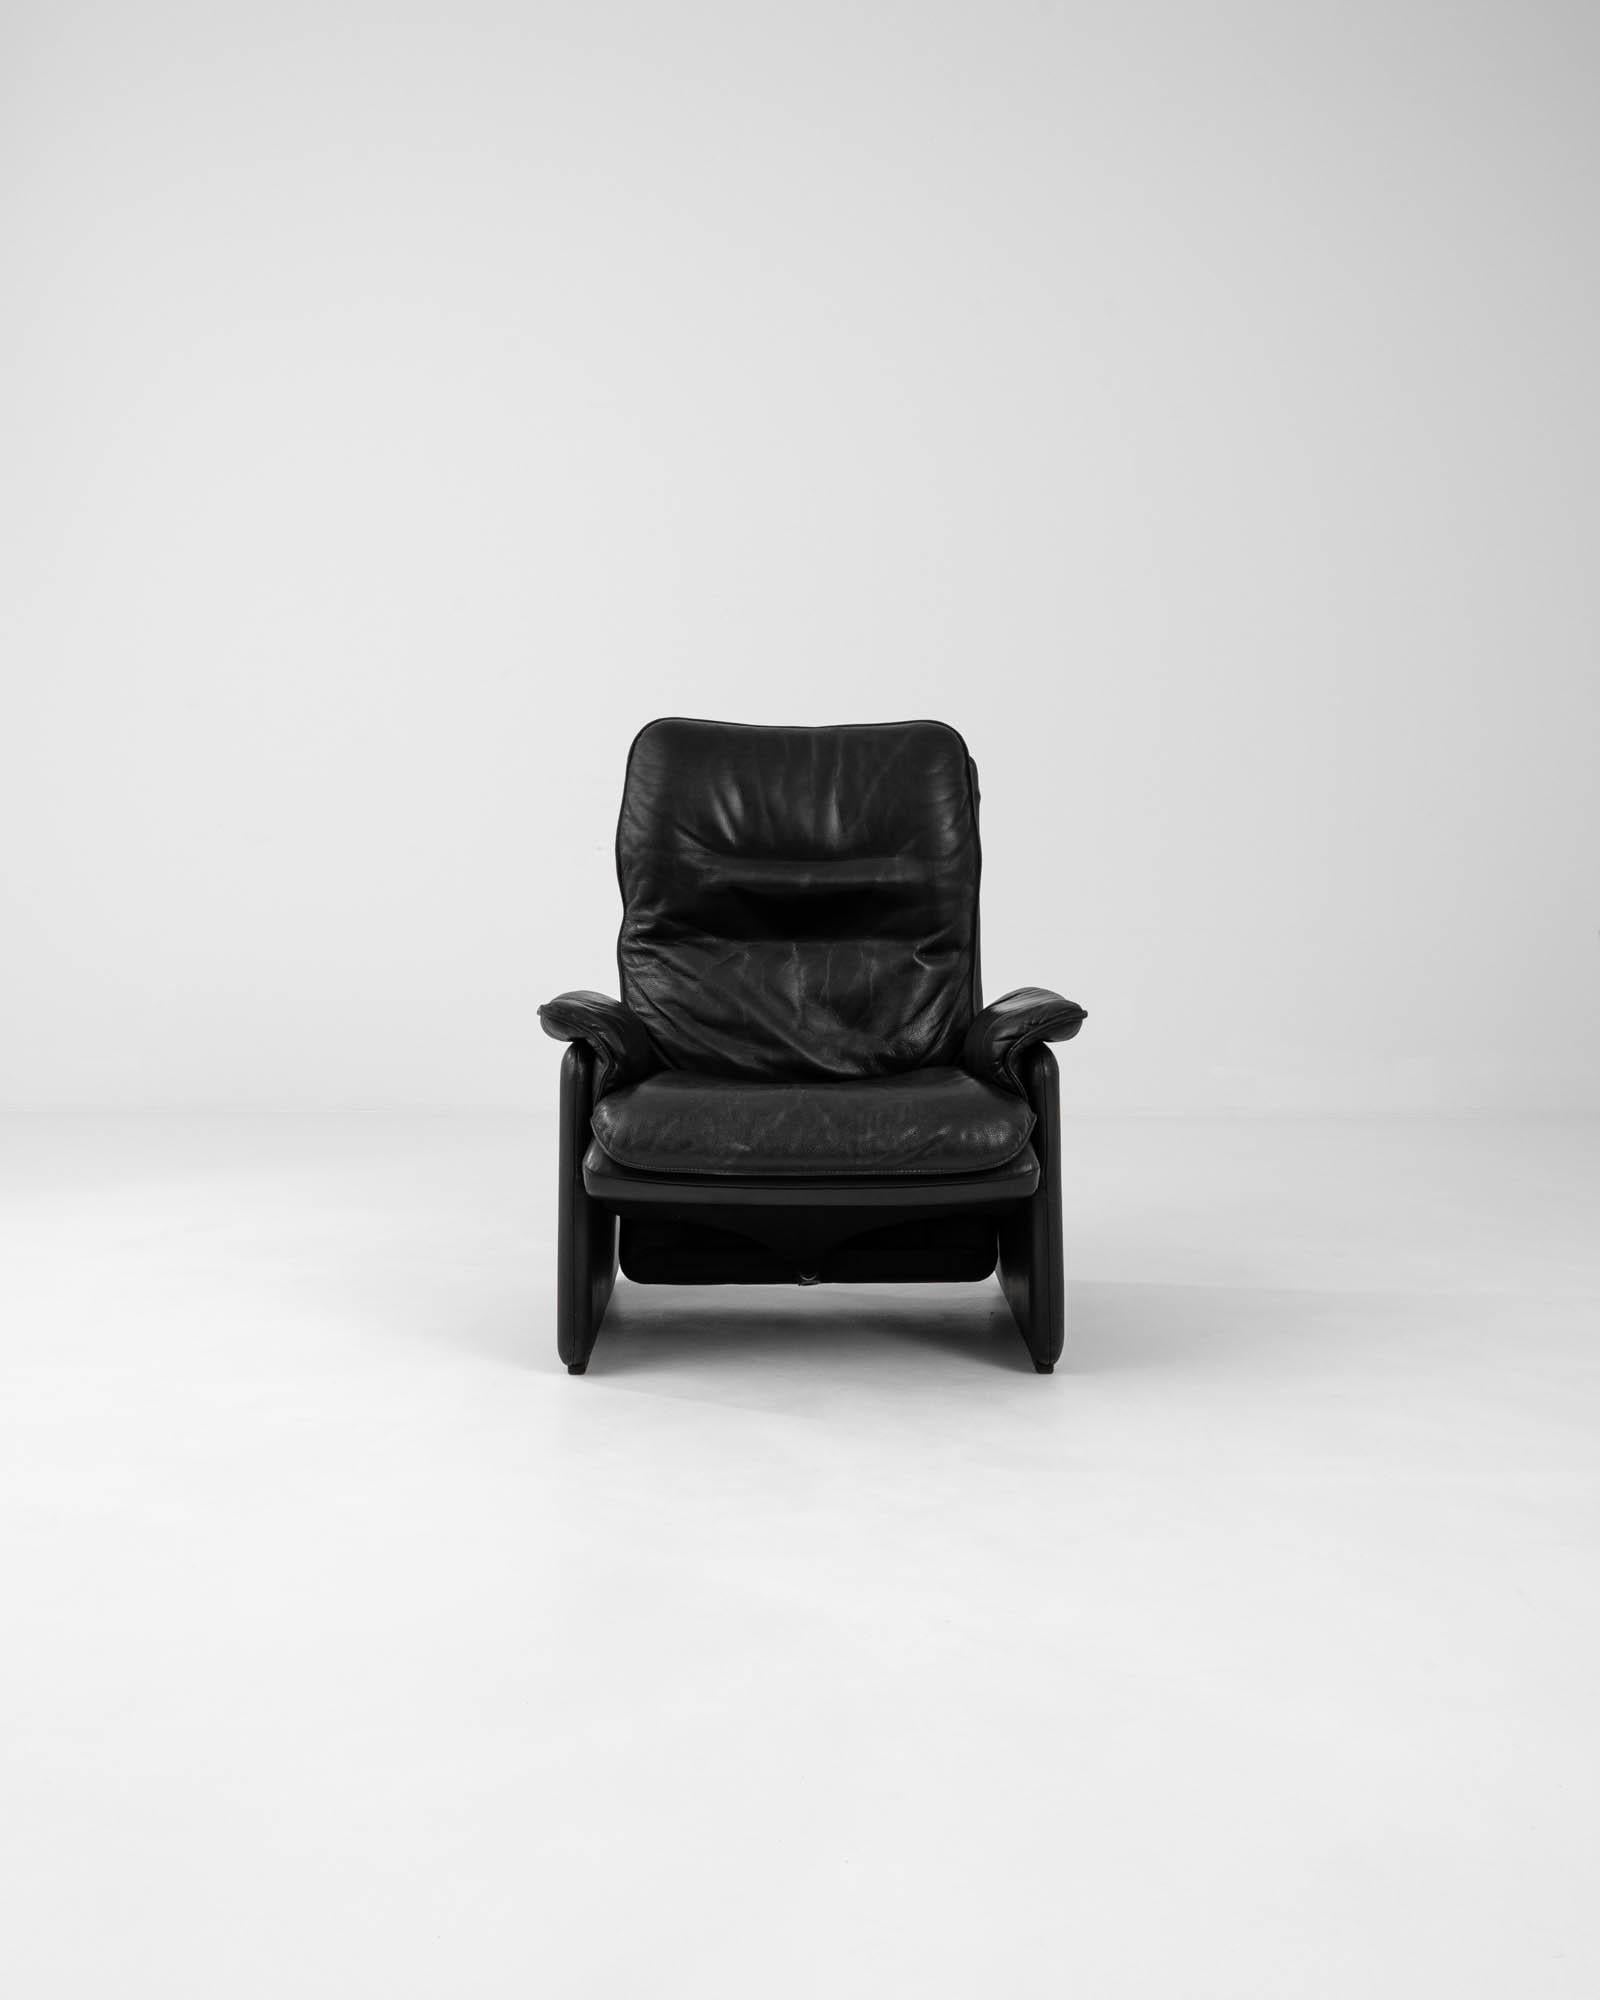 Introducing the quintessence of luxury and comfort with this 1960s Swiss leather armchair by De Sede, a renowned name in craftsmanship and design. Clad in sumptuous black leather, this chair features plush padding that envelops you in unparalleled